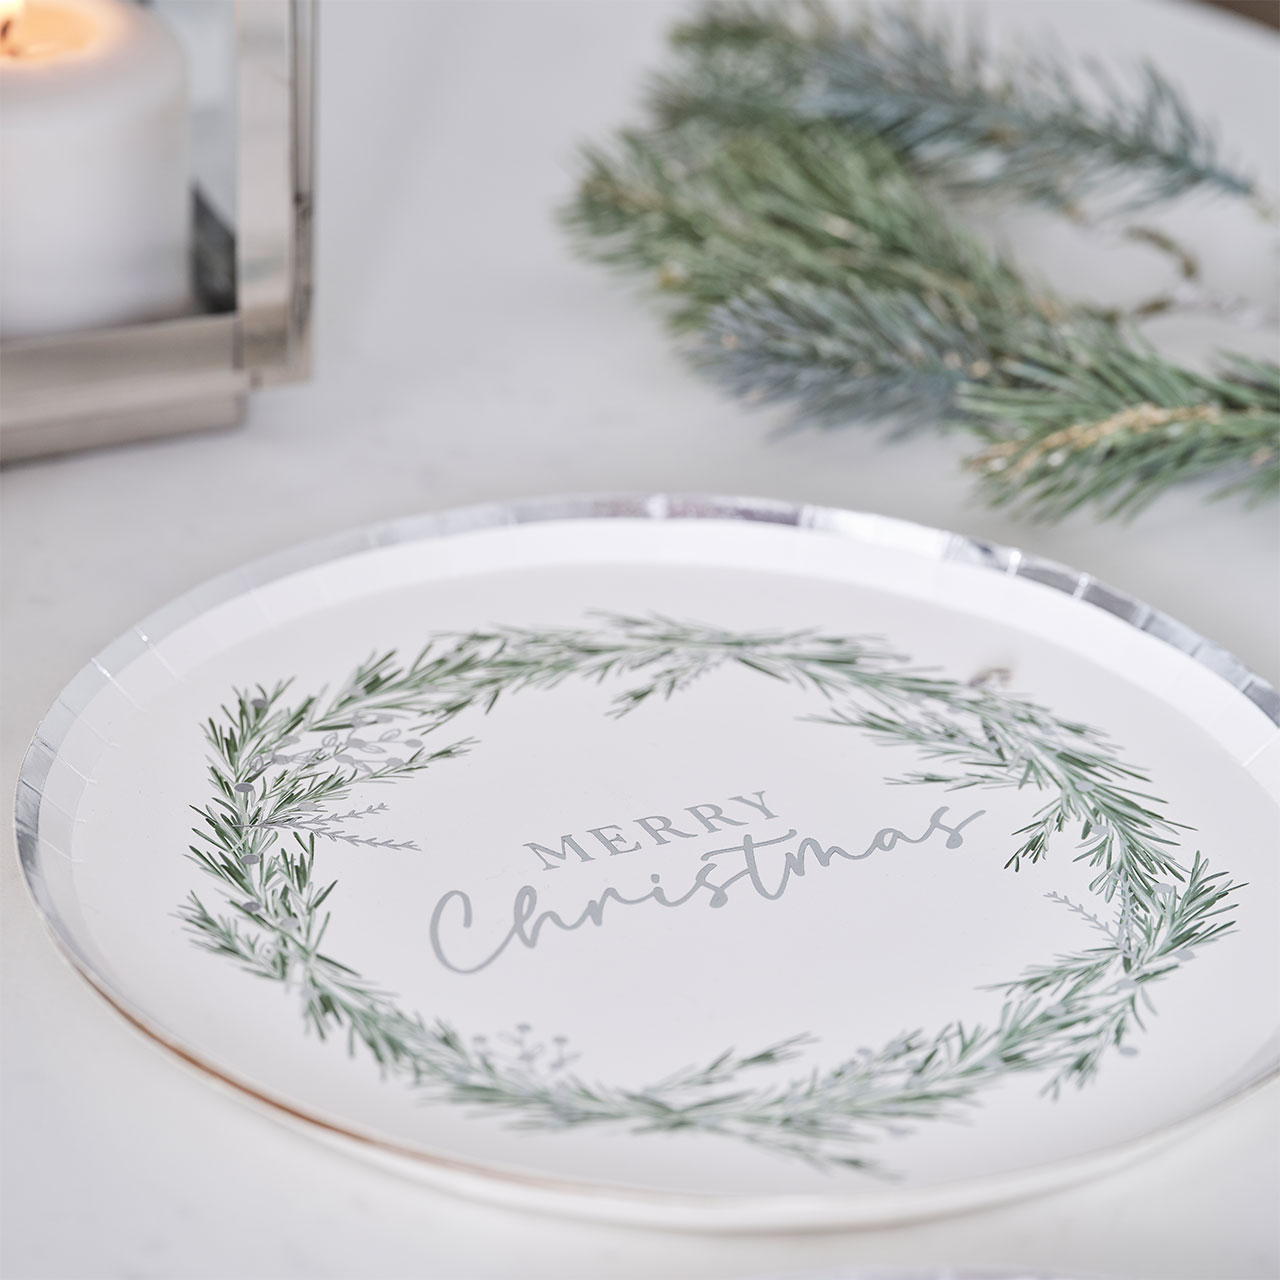 Plates - Rustic Silver Merry Christmas